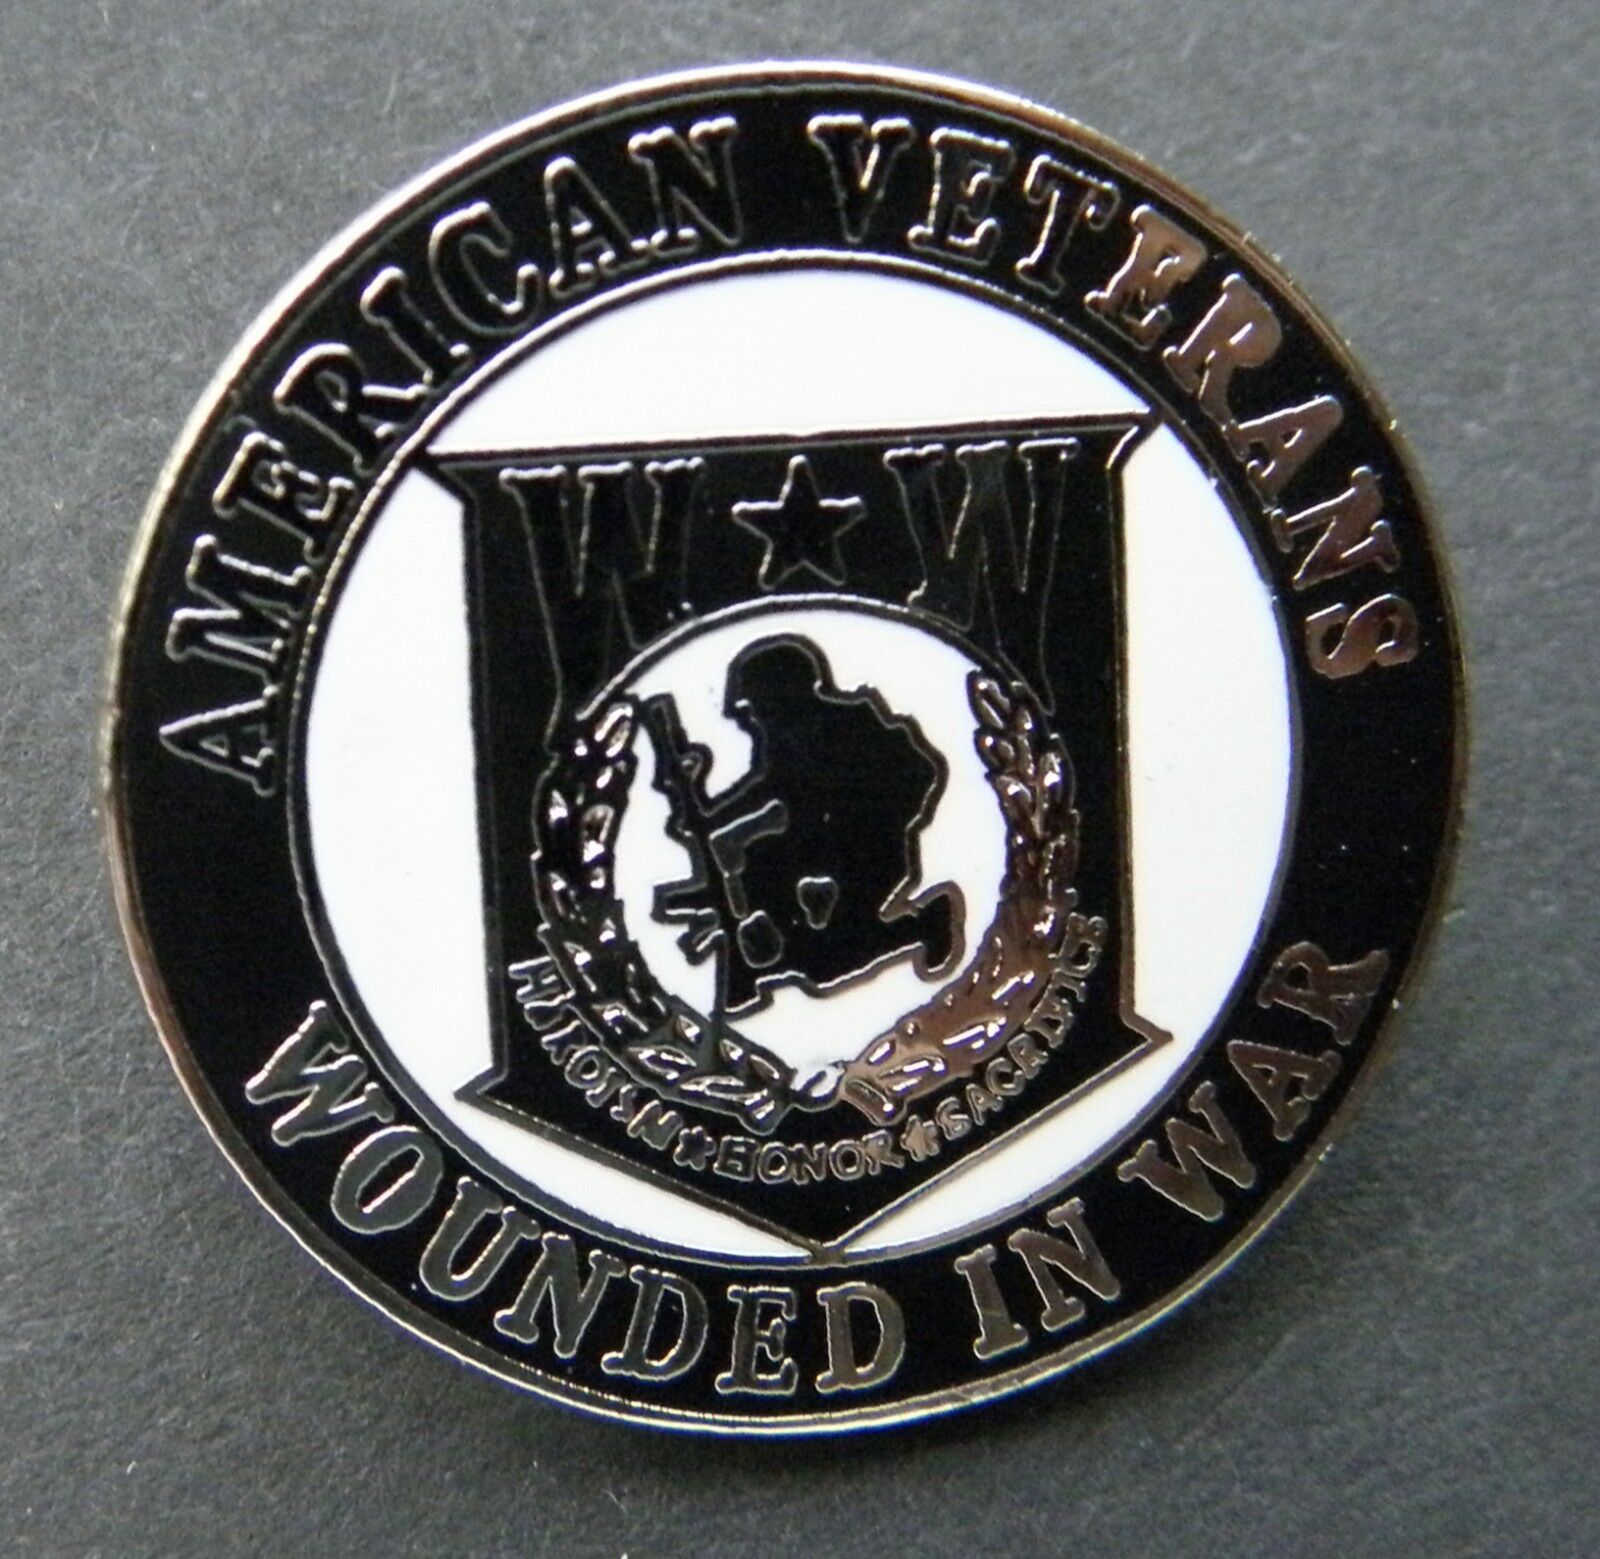 AMERICAN VETERANS WOUNDED WARRIOR WOUNDED IN WAR LAPEL PIN BADGE 1 INCH